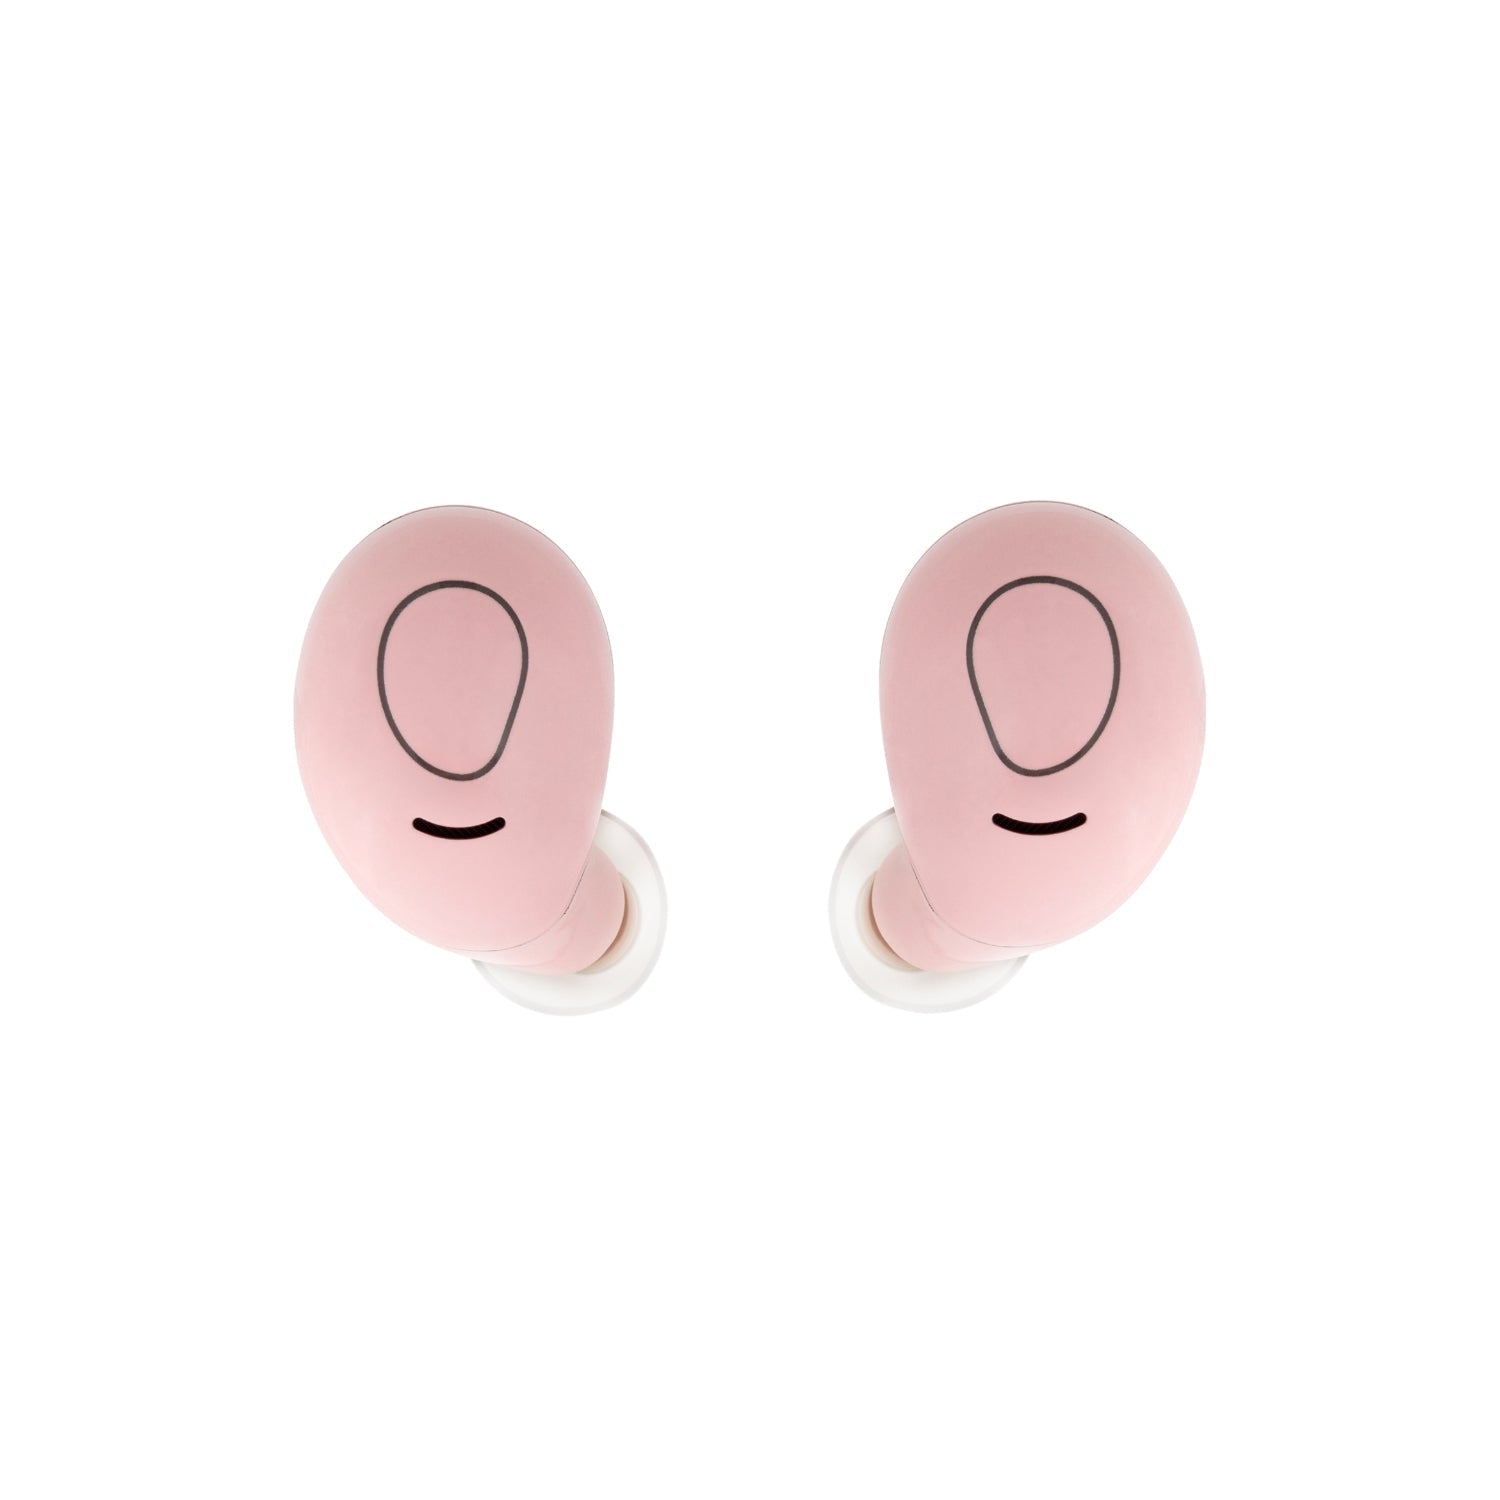 AIR ZEN 2.0 Pink Earbuds (In Ear Wireless Headphones) - Supporting Breast Cancer Research